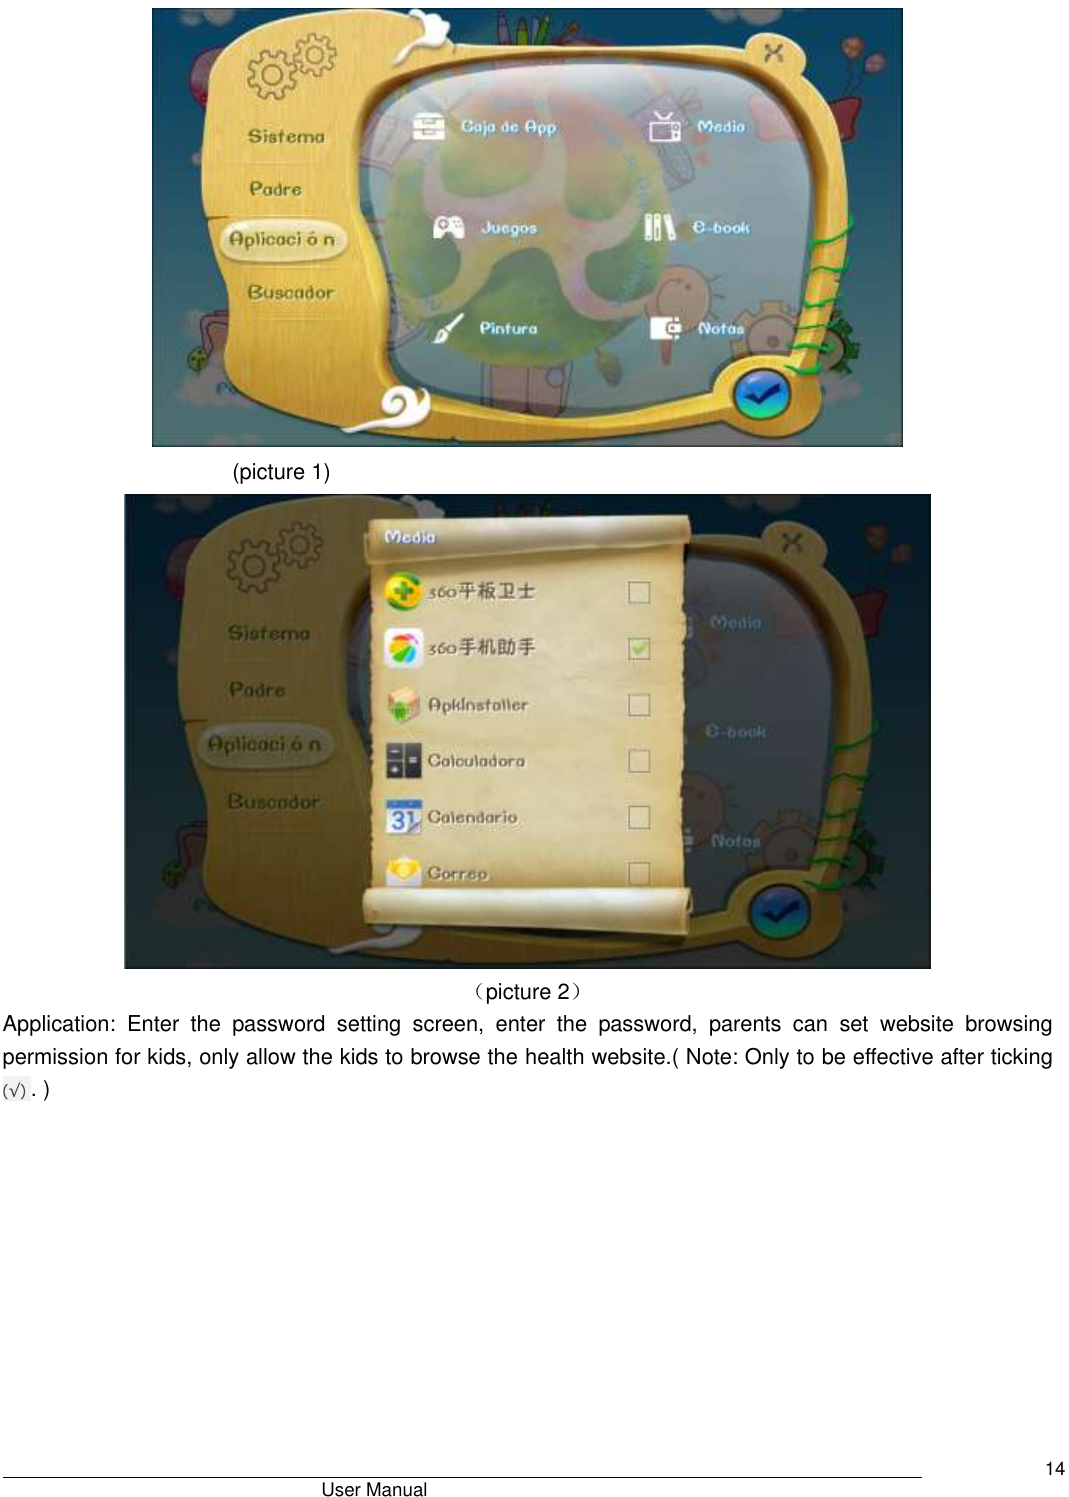                                       User Manual     14  (picture 1)  （picture 2） Application:  Enter  the  password  setting  screen,  enter  the  password,  parents  can  set  website  browsing permission for kids, only allow the kids to browse the health website.( Note: Only to be effective after ticking (√) . ) 